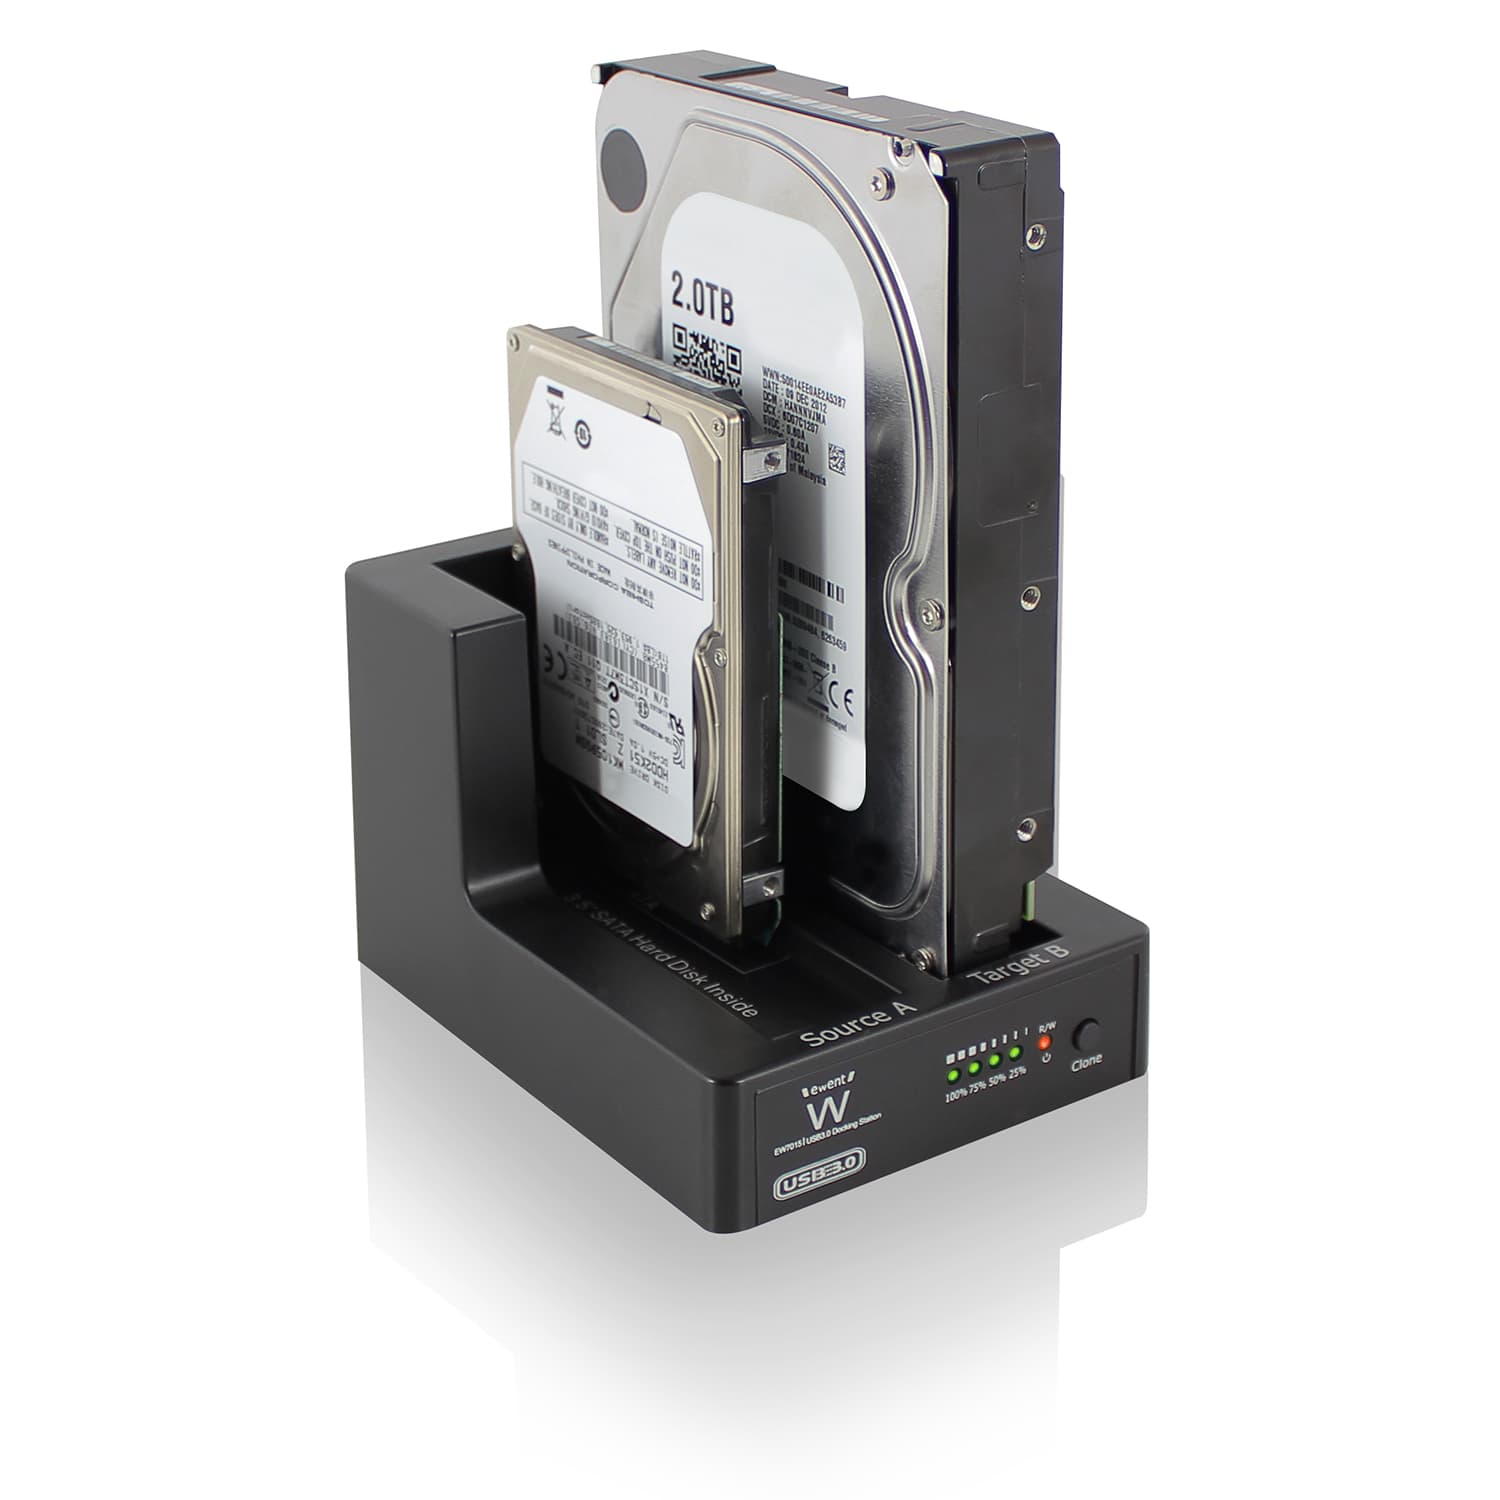 Review: Ewent Dual Docking Station USB 3.0 for SATA 2.5” and 3.5” EW7015